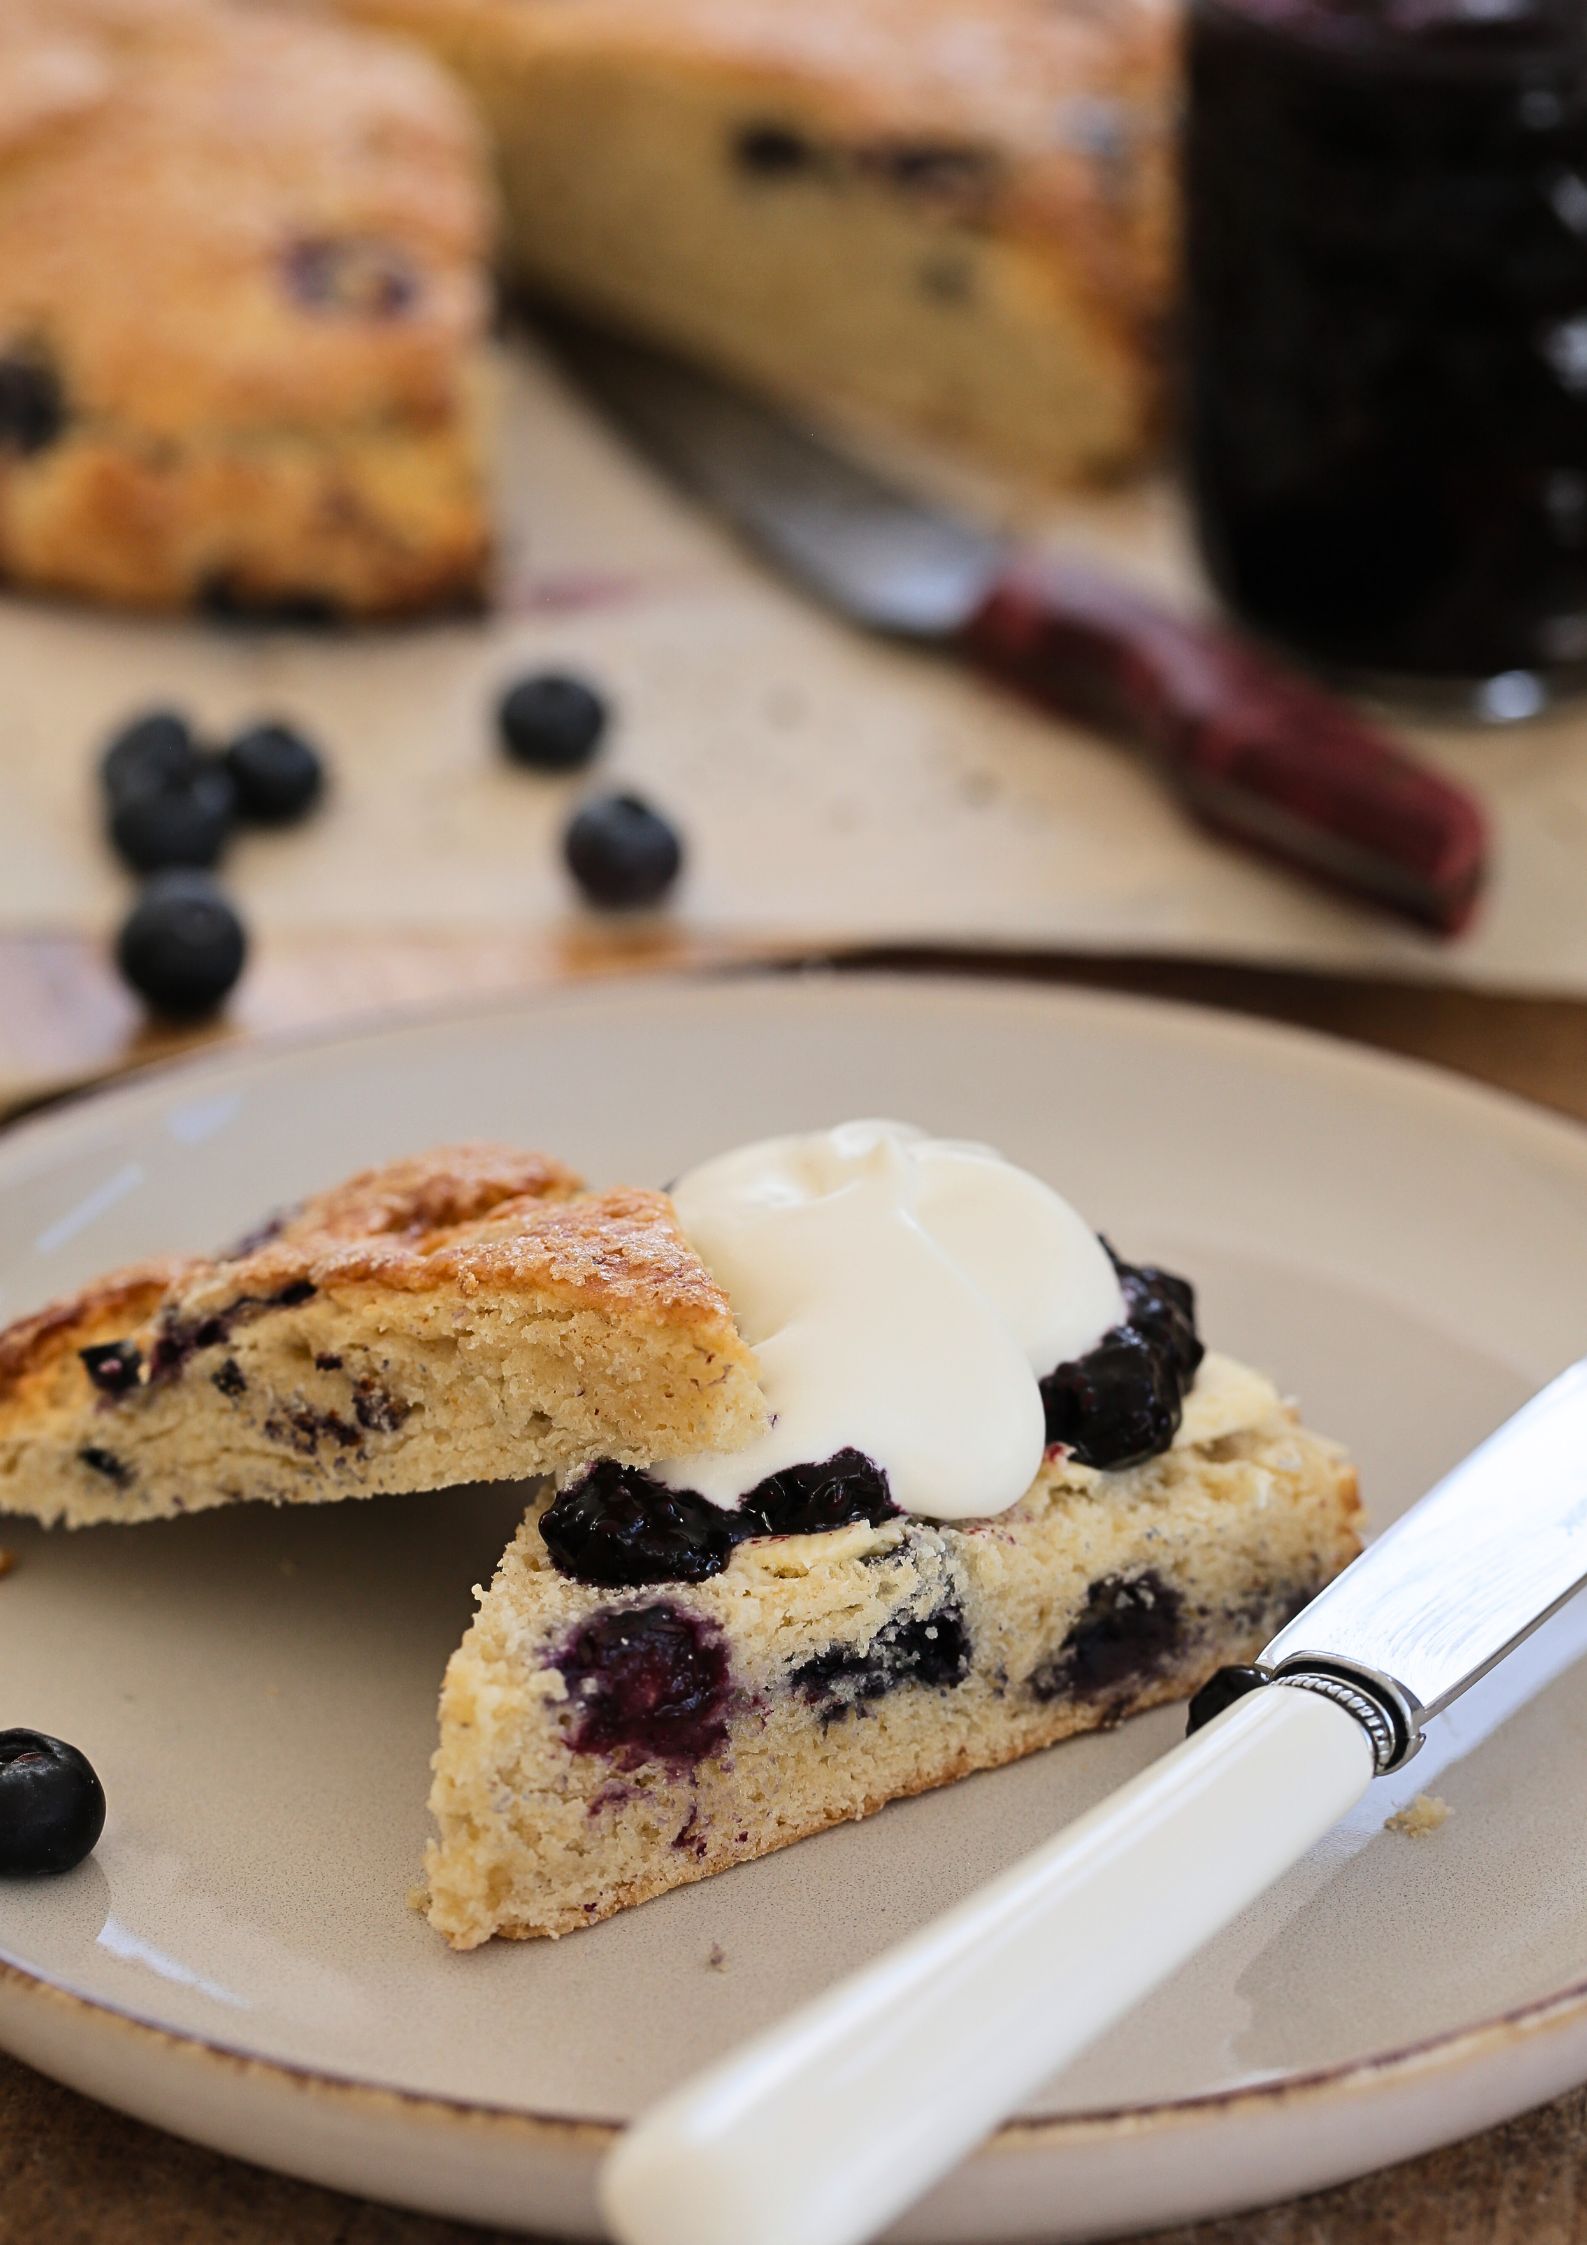 The easiest blueberry scones, made in one bowl with a few simple ingredients. They have a wonderful sugary, crunchy top and are served with an easy homemade blueberry jam and whipped vegan cream for the perfect afternoon tea treat! #veganscones #blueberryscones #eggfree #blueberryjam